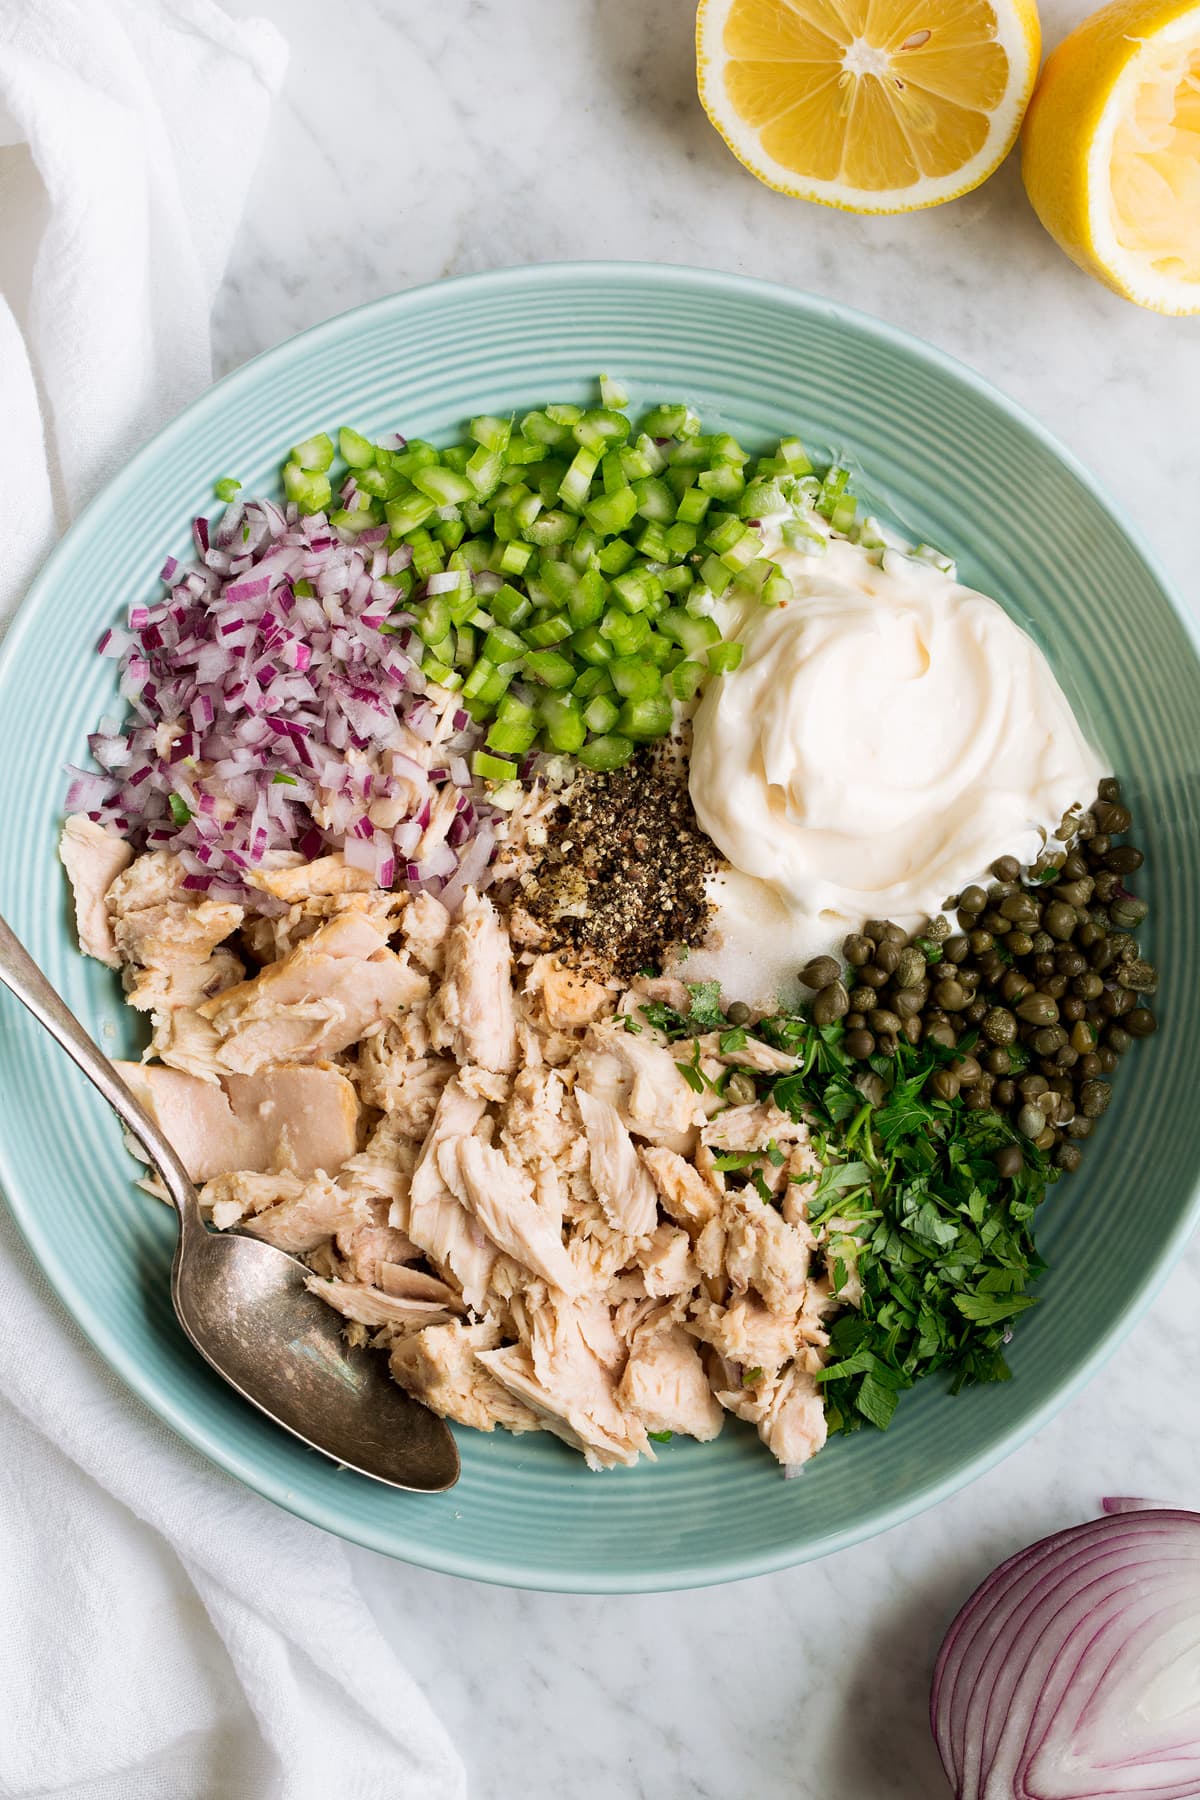 Image of tuna, parsley, red onion, celery, mayonnaise, lemon juice, capers, salt and pepper in a mixing bowl.